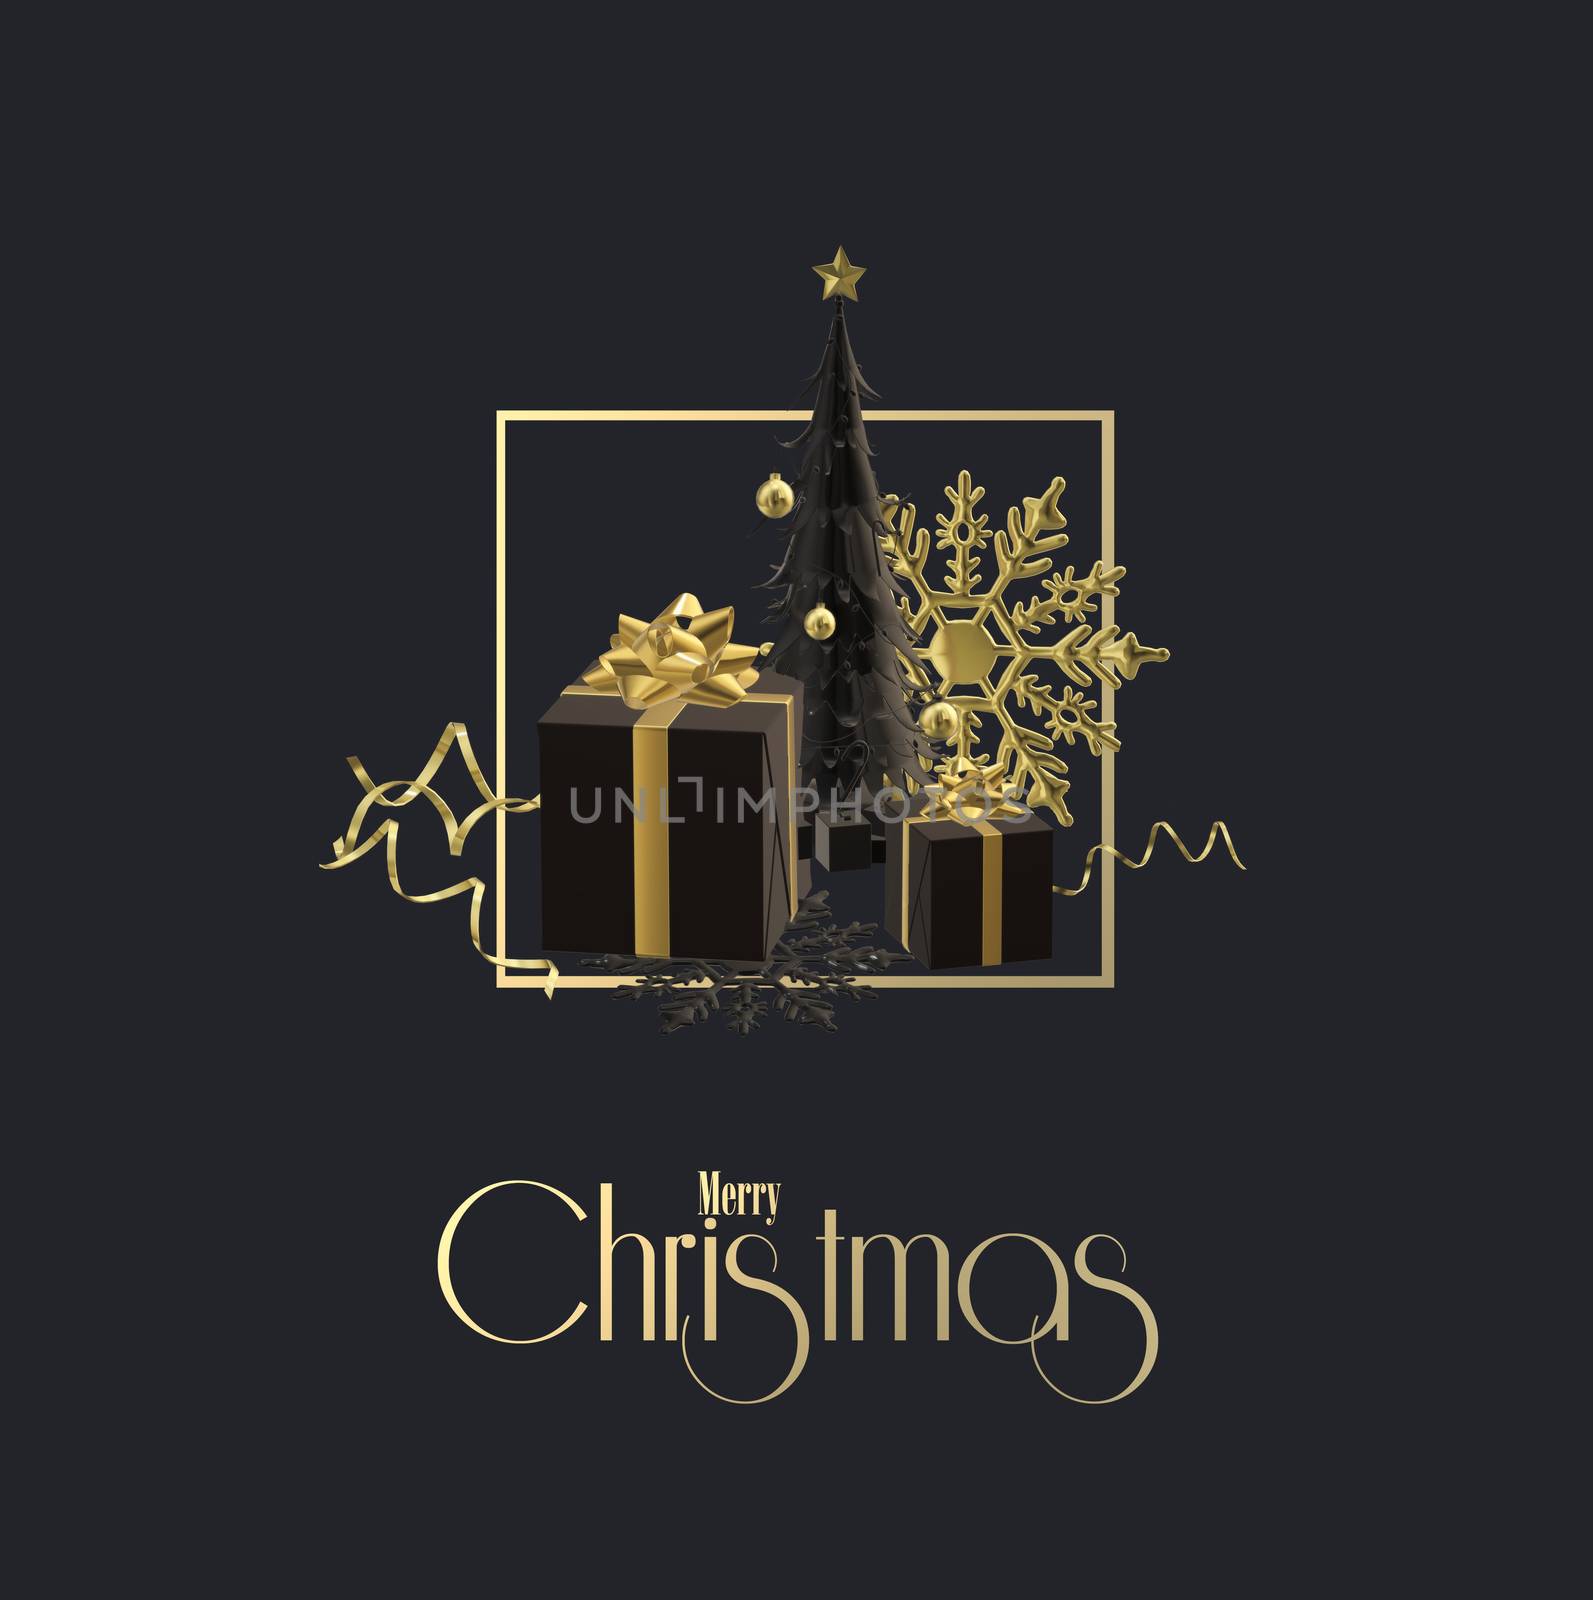 Christmas holiday card in black and gold. Abstract Xmas gift boxes, Xmas tree, snowflakes, strimmer, golden frame, text Merry Christmas on black background. 3D illustration